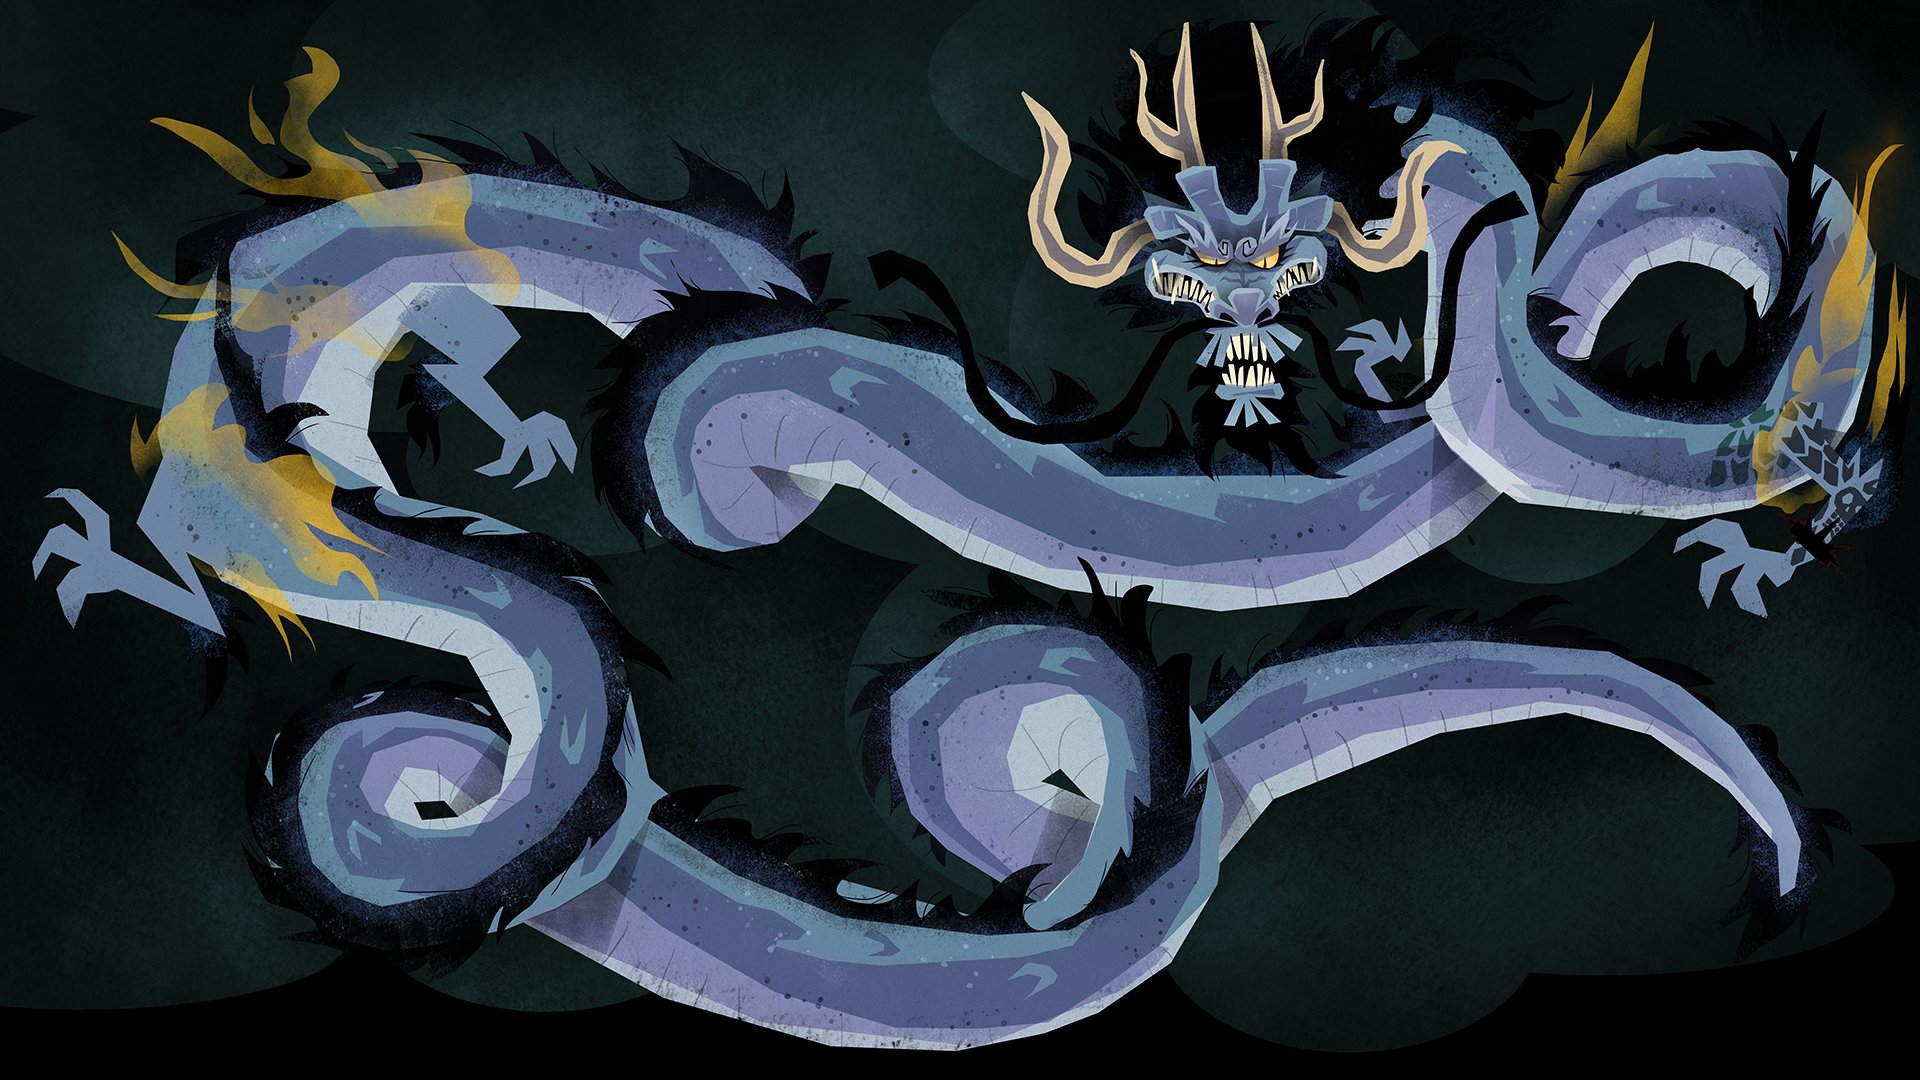 Revujo Kaido Is Way Less Threatening Now That He Is Blue Onepiece Kaido Bluedragon Volume92 T Co Uxpnobebr6 Twitter